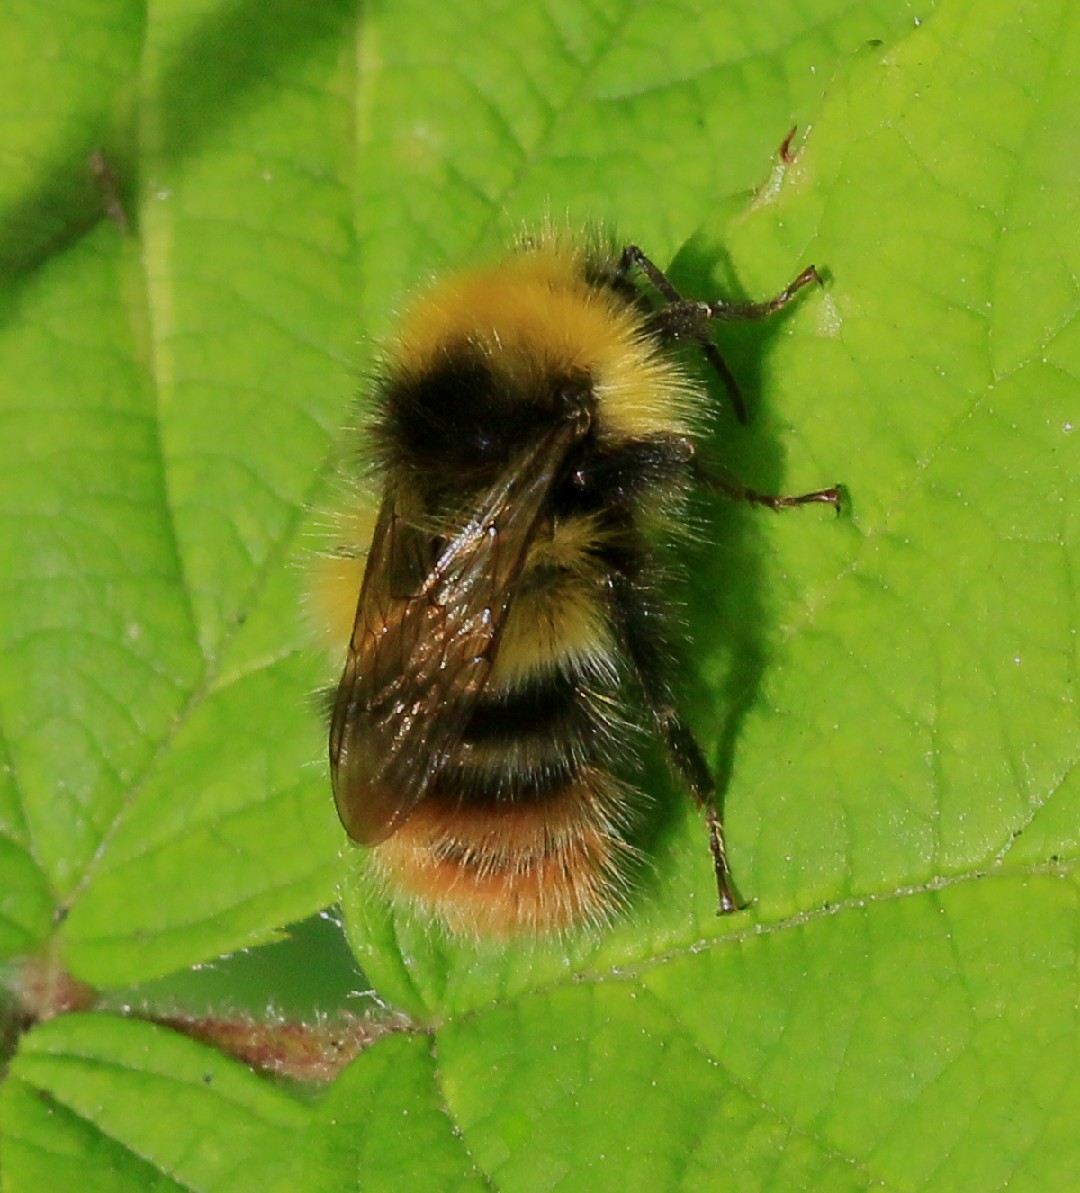 Researchers emphasise that bumble bees need biodiversity